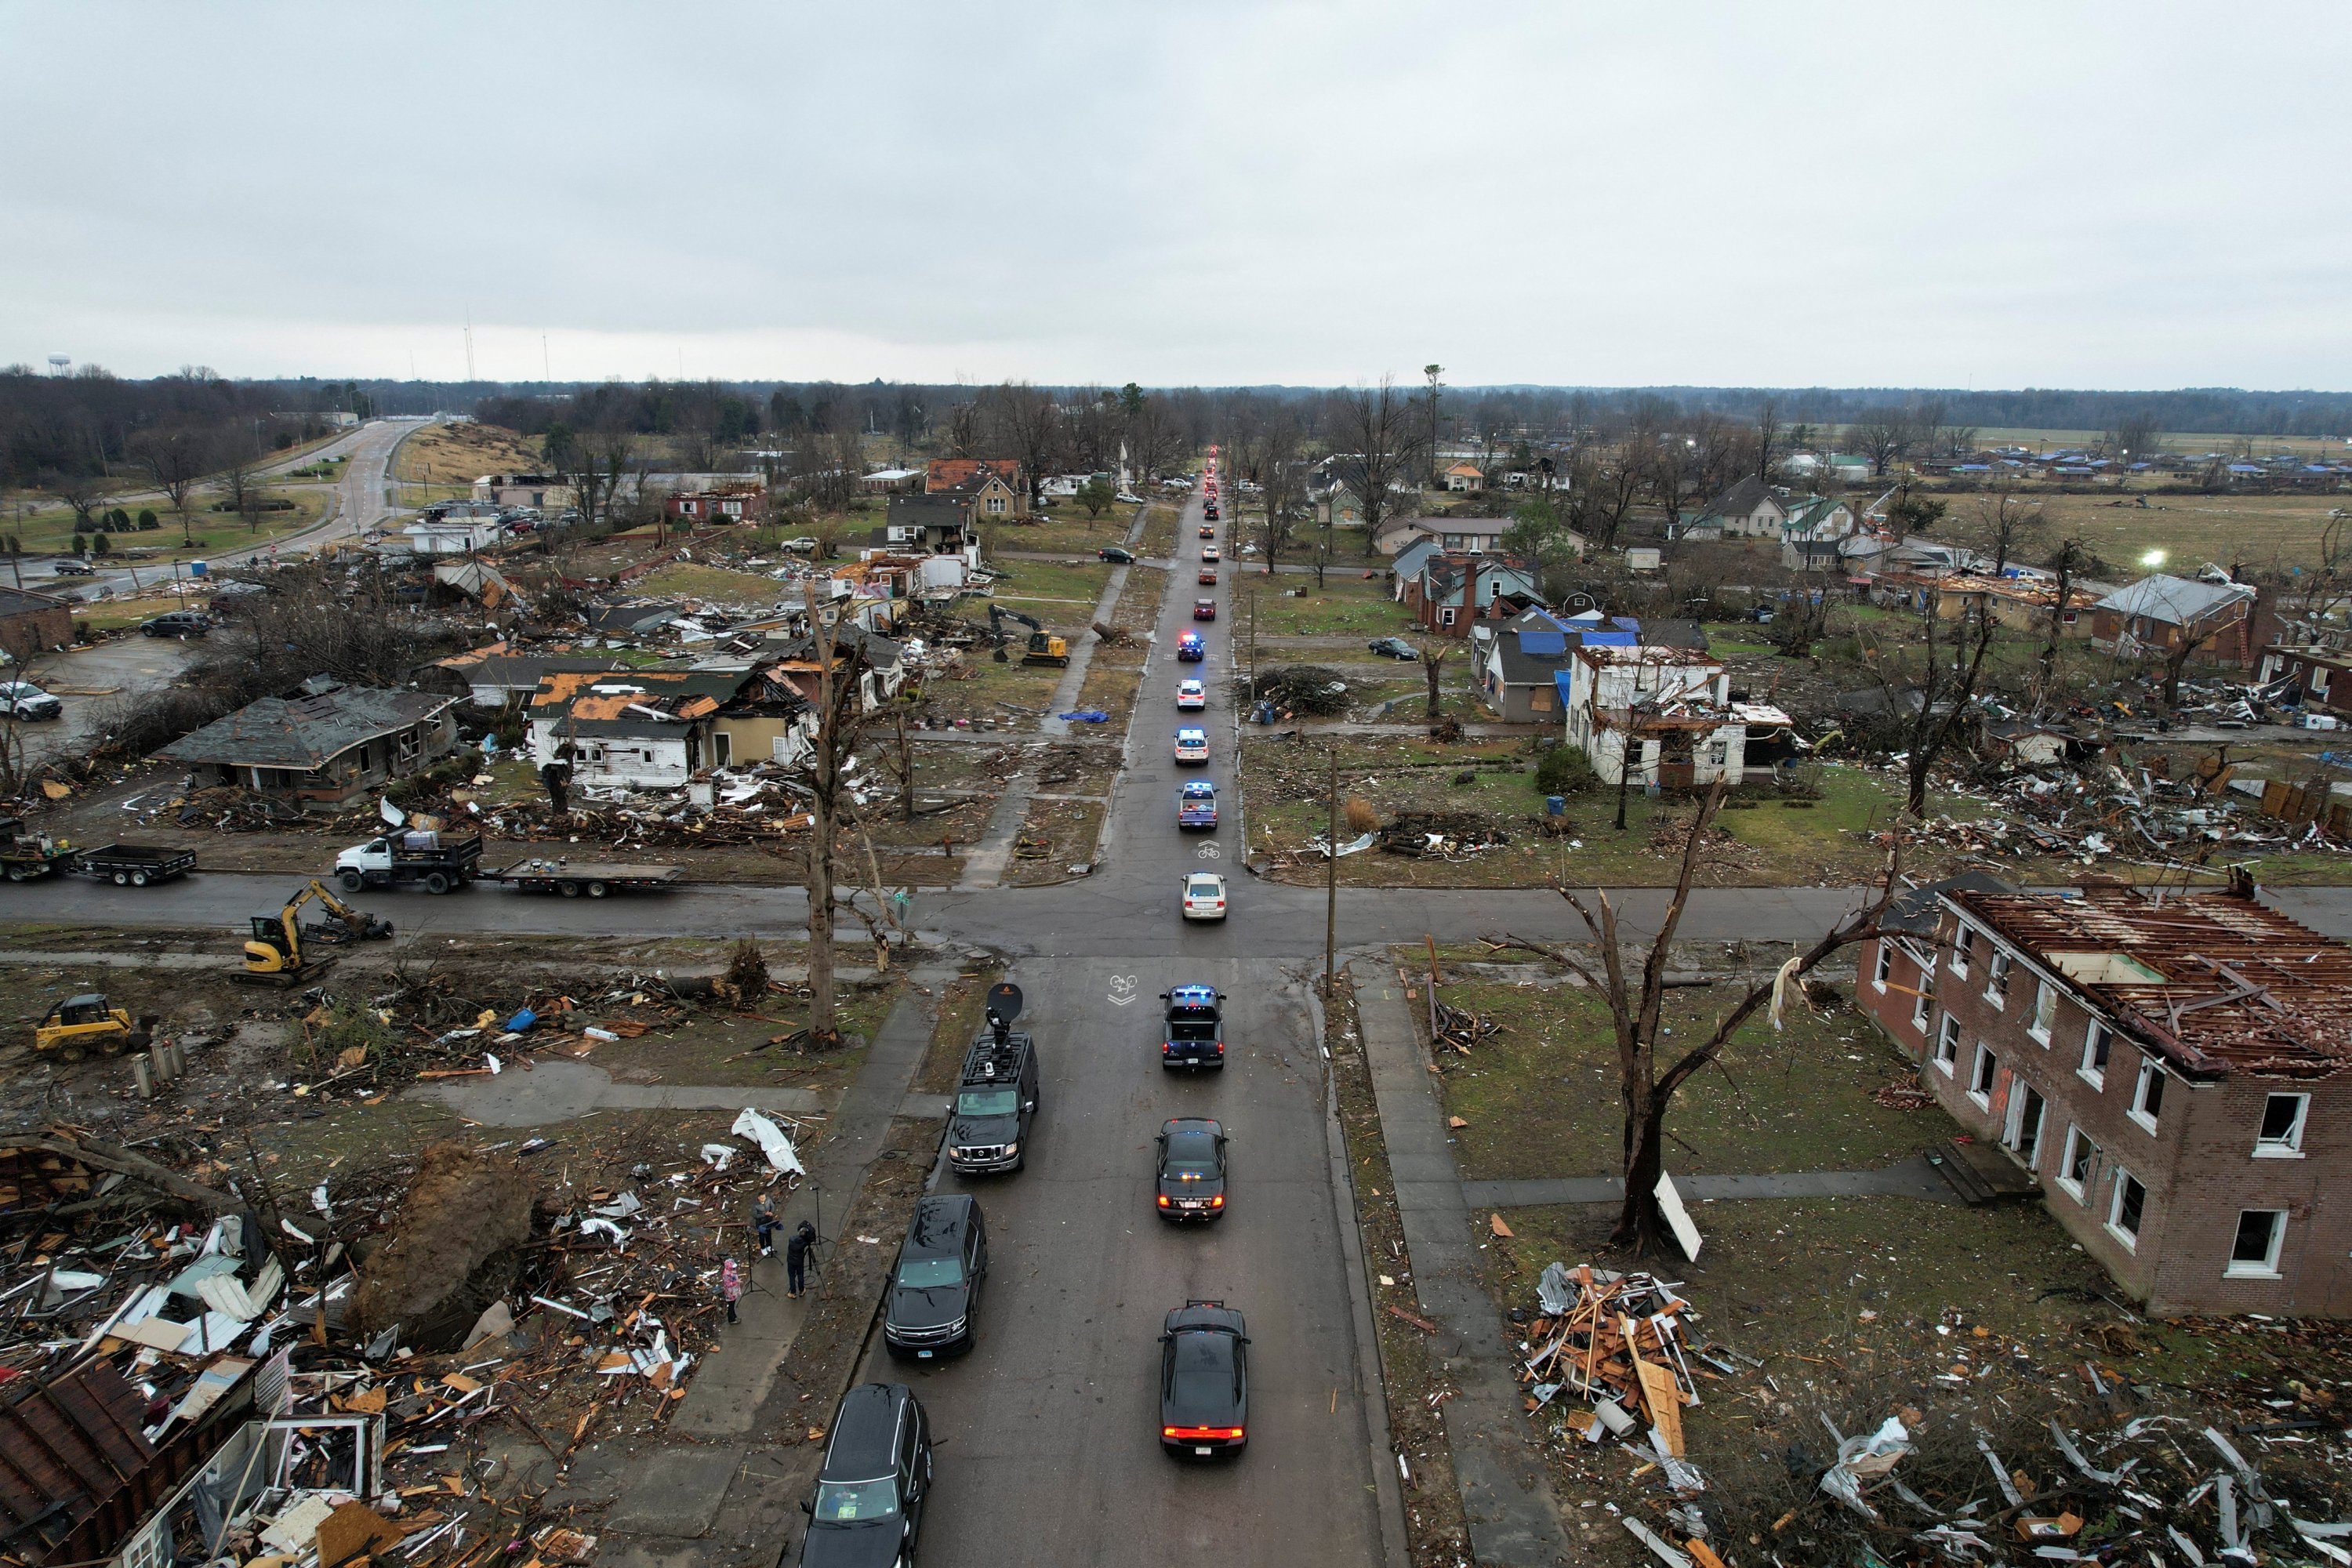 The funeral procession for corrections officer Robert Daniel passes a street lined with rubble and debris in Mayfield, Kentucky, U.S., Dec. 18, 2021.(Reuters Photo)